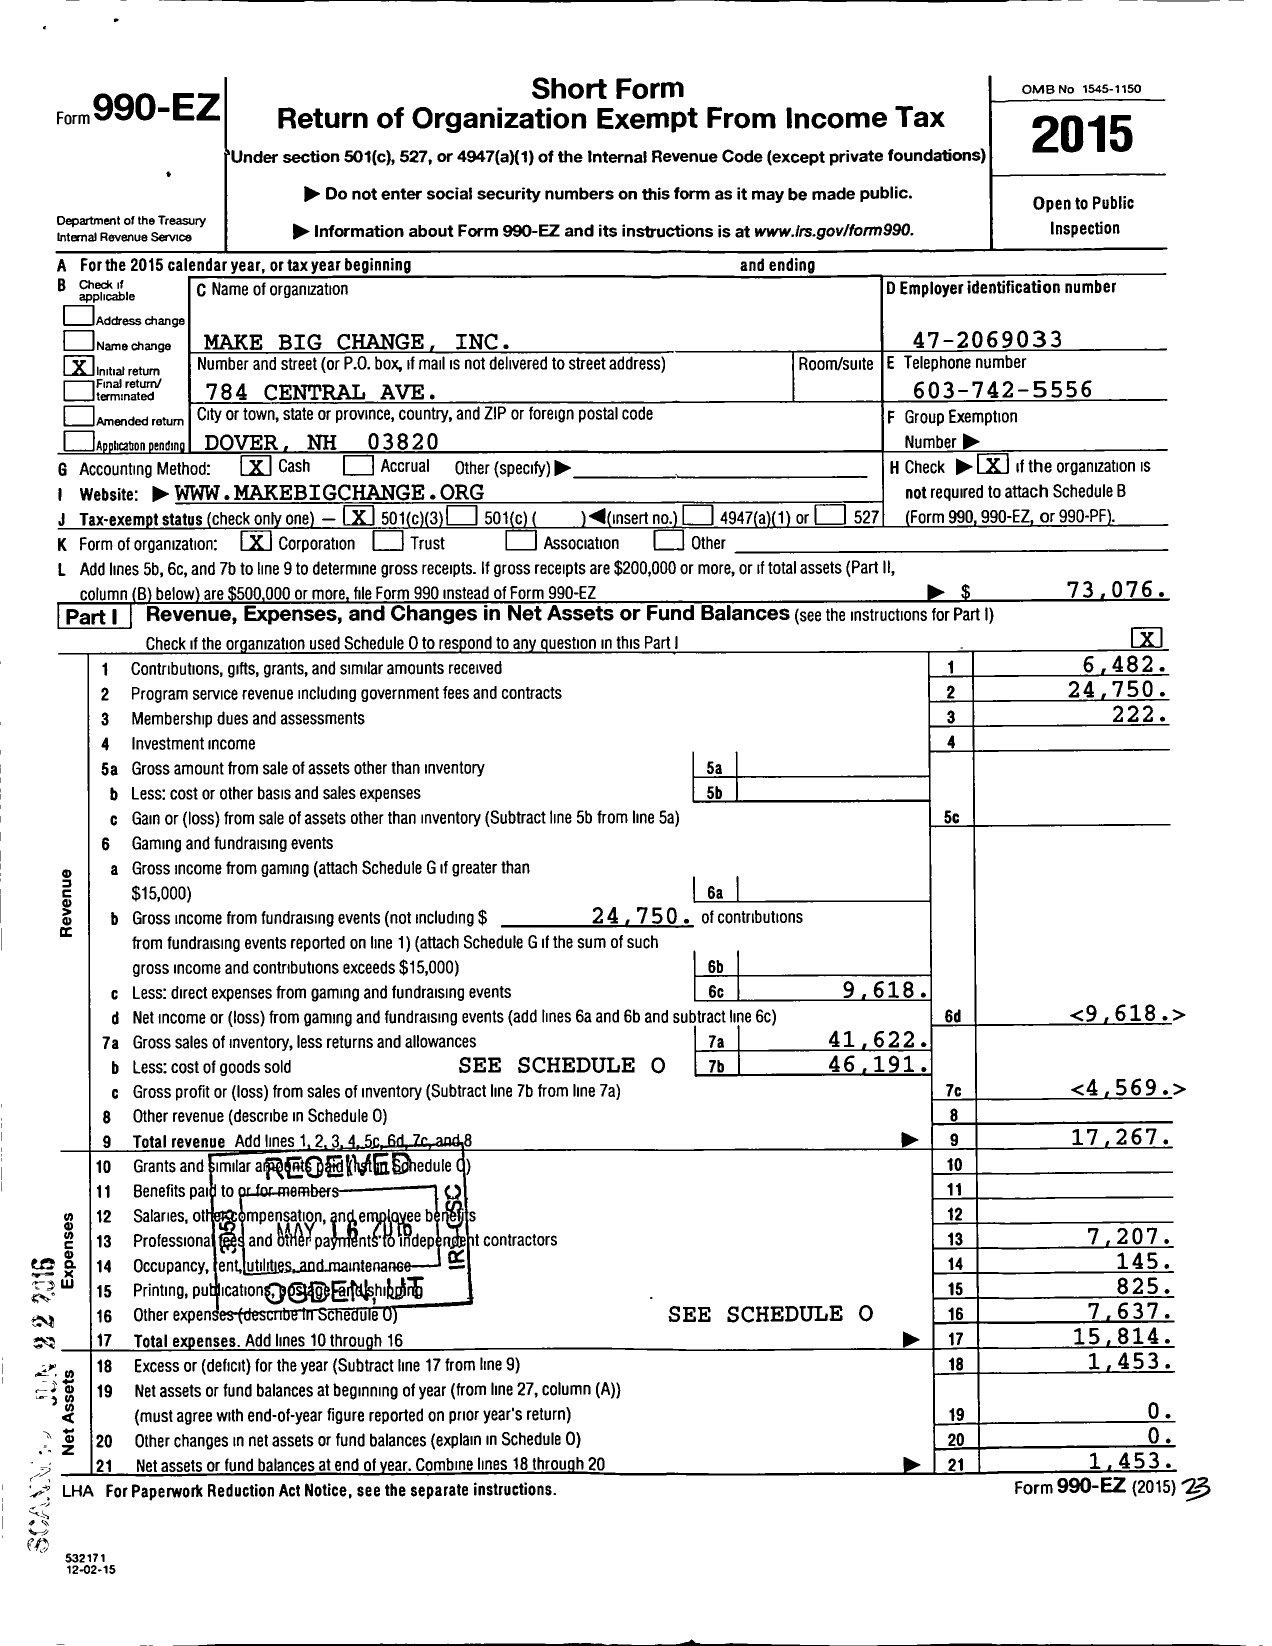 Image of first page of 2015 Form 990EZ for Make Big Change